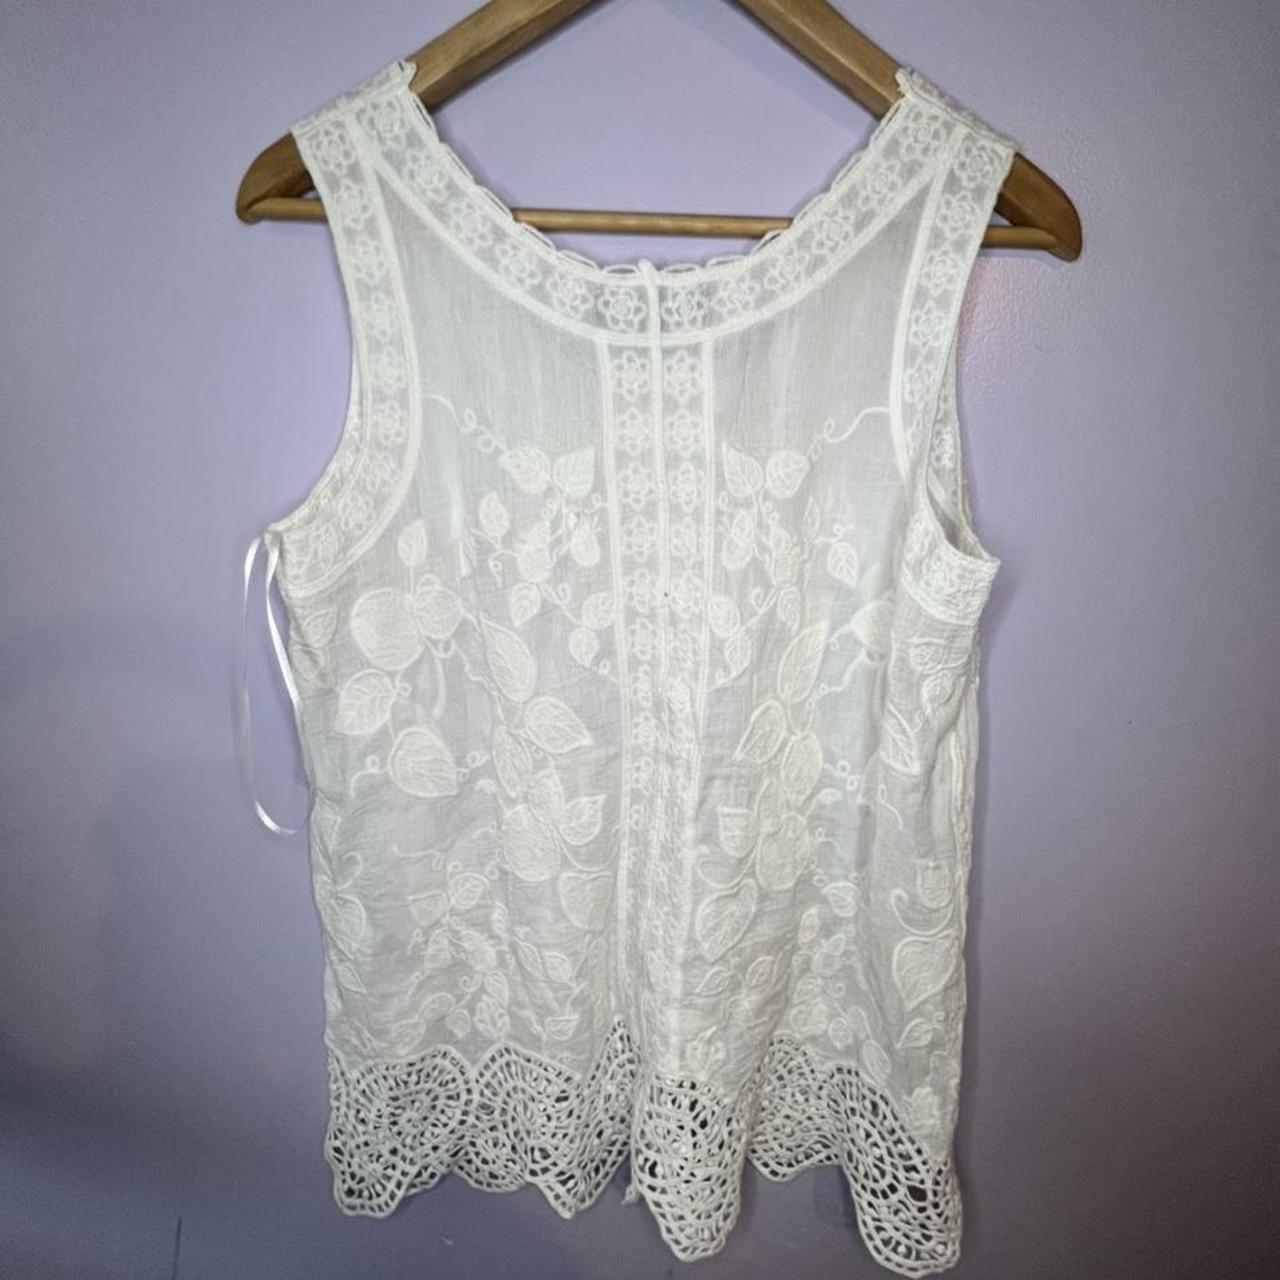 Product Image 2 - Light weight cute top!